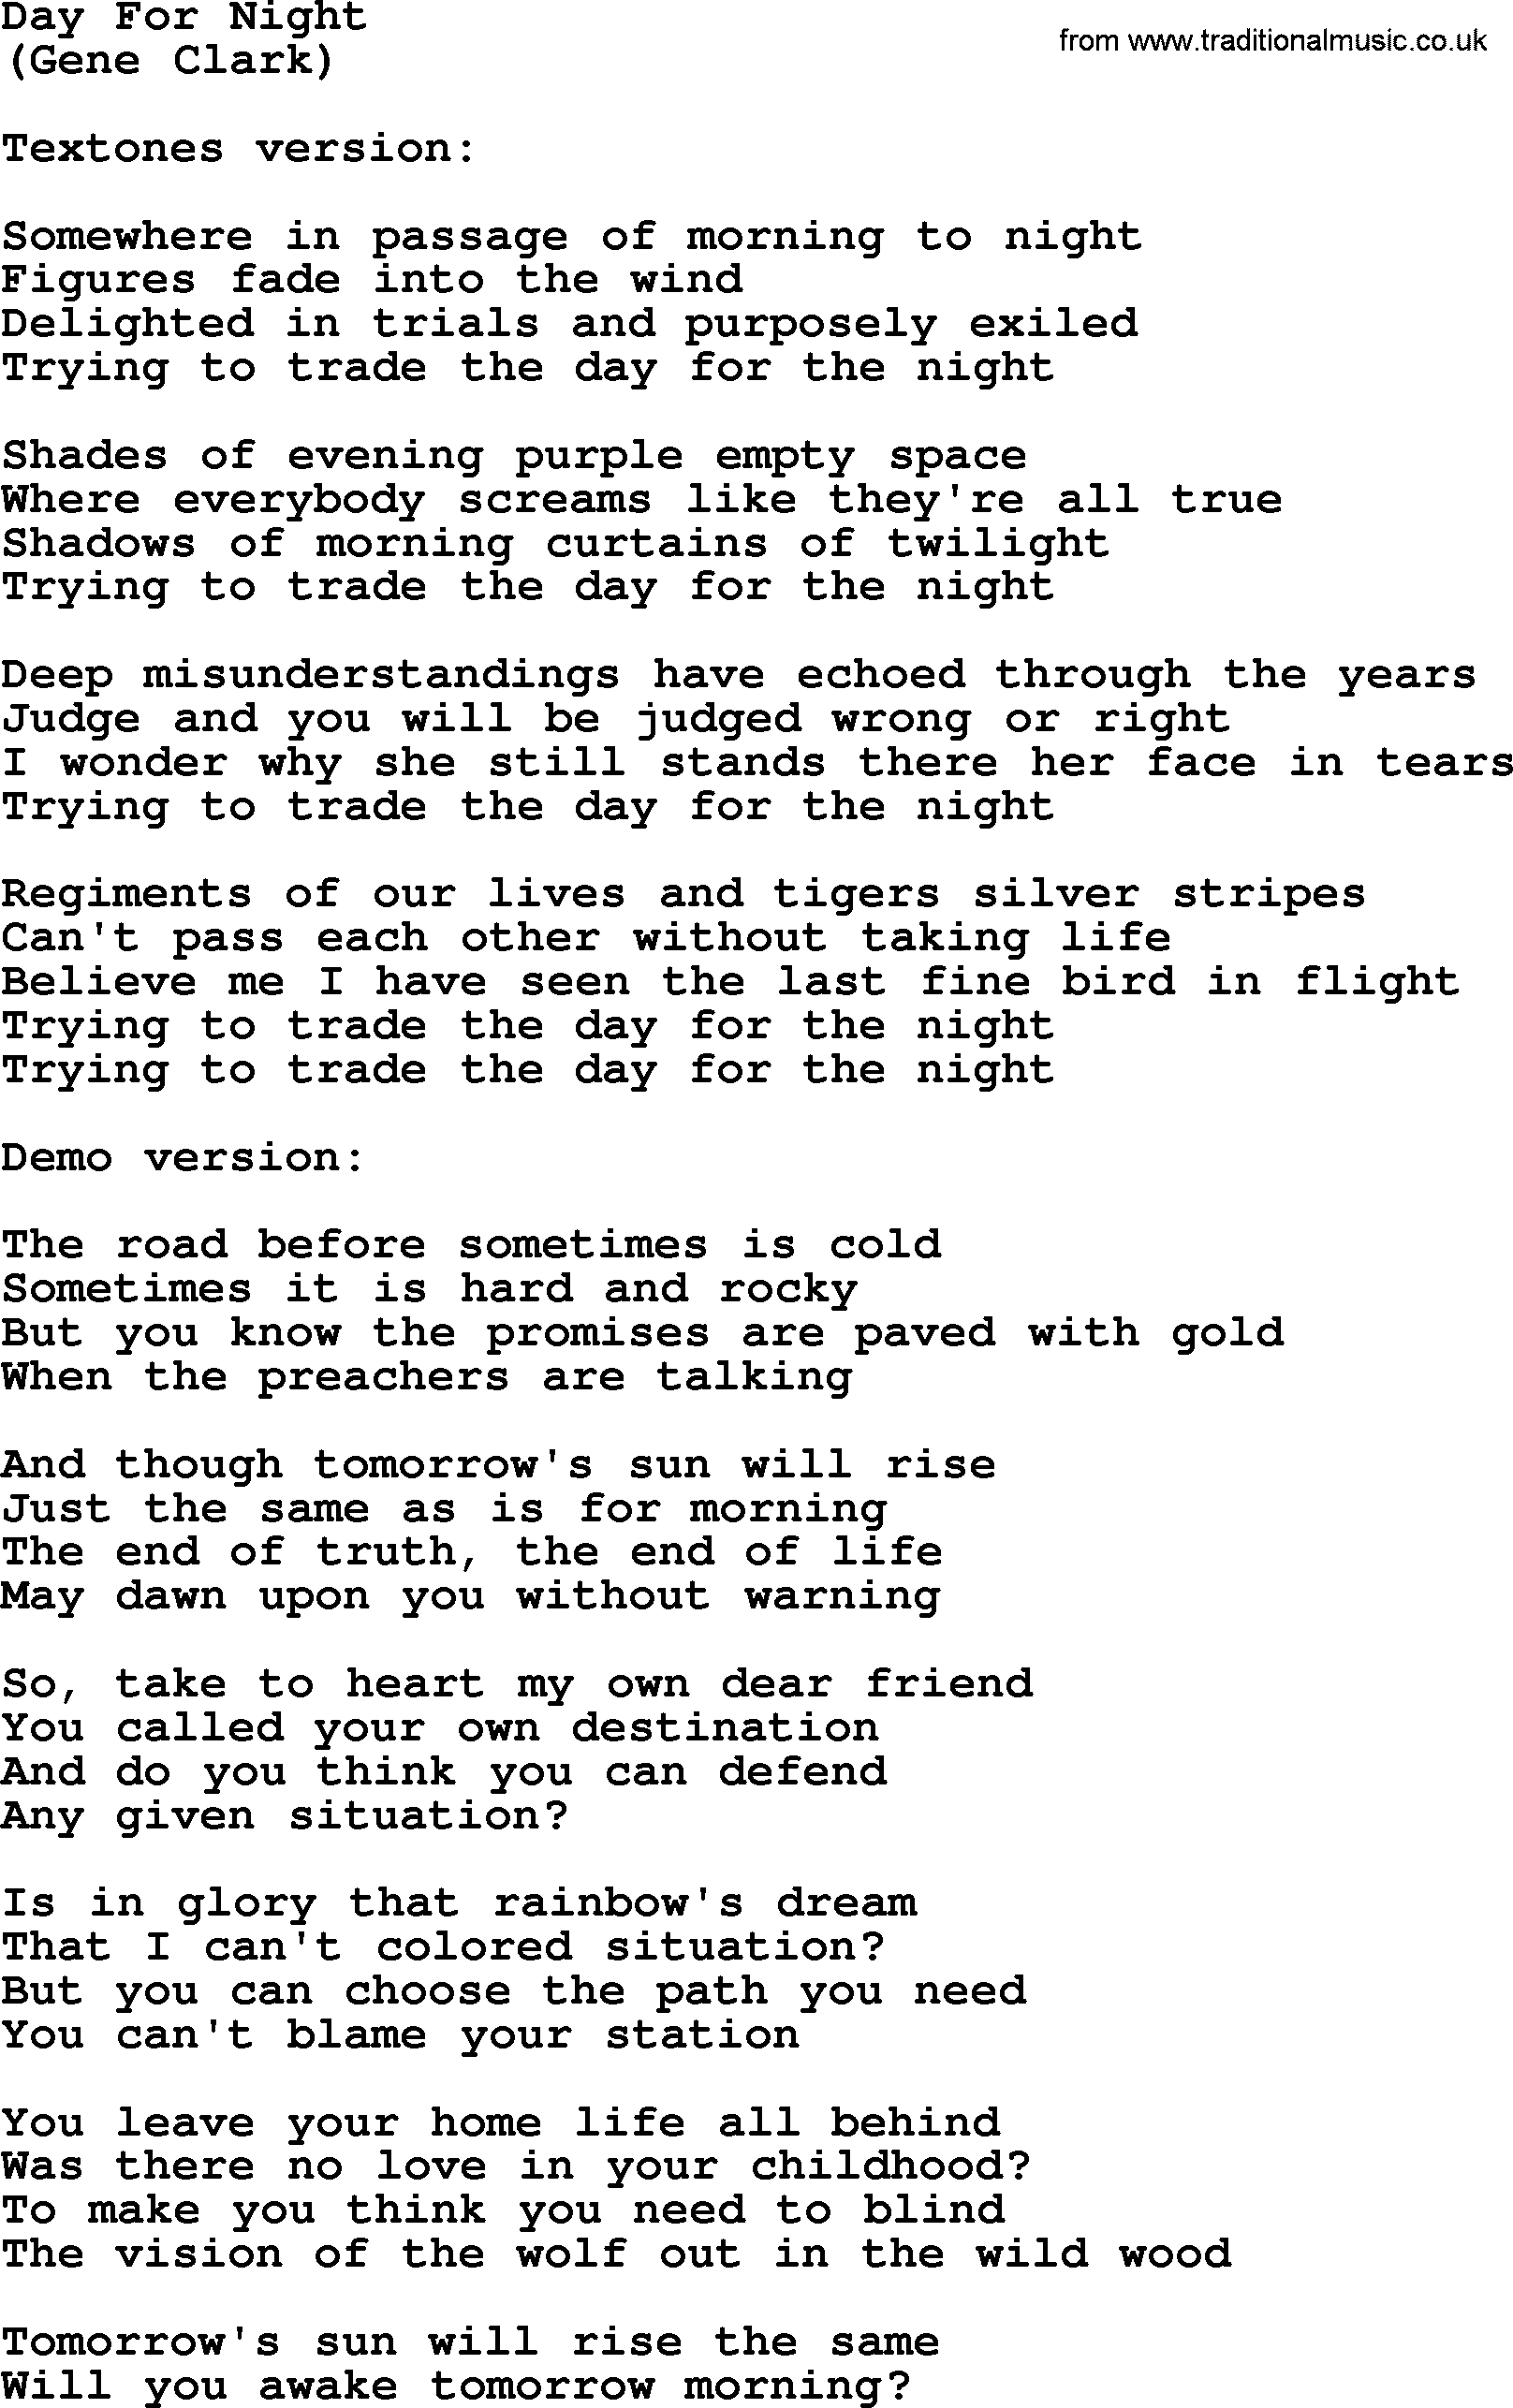 The Byrds song Day For Night, lyrics